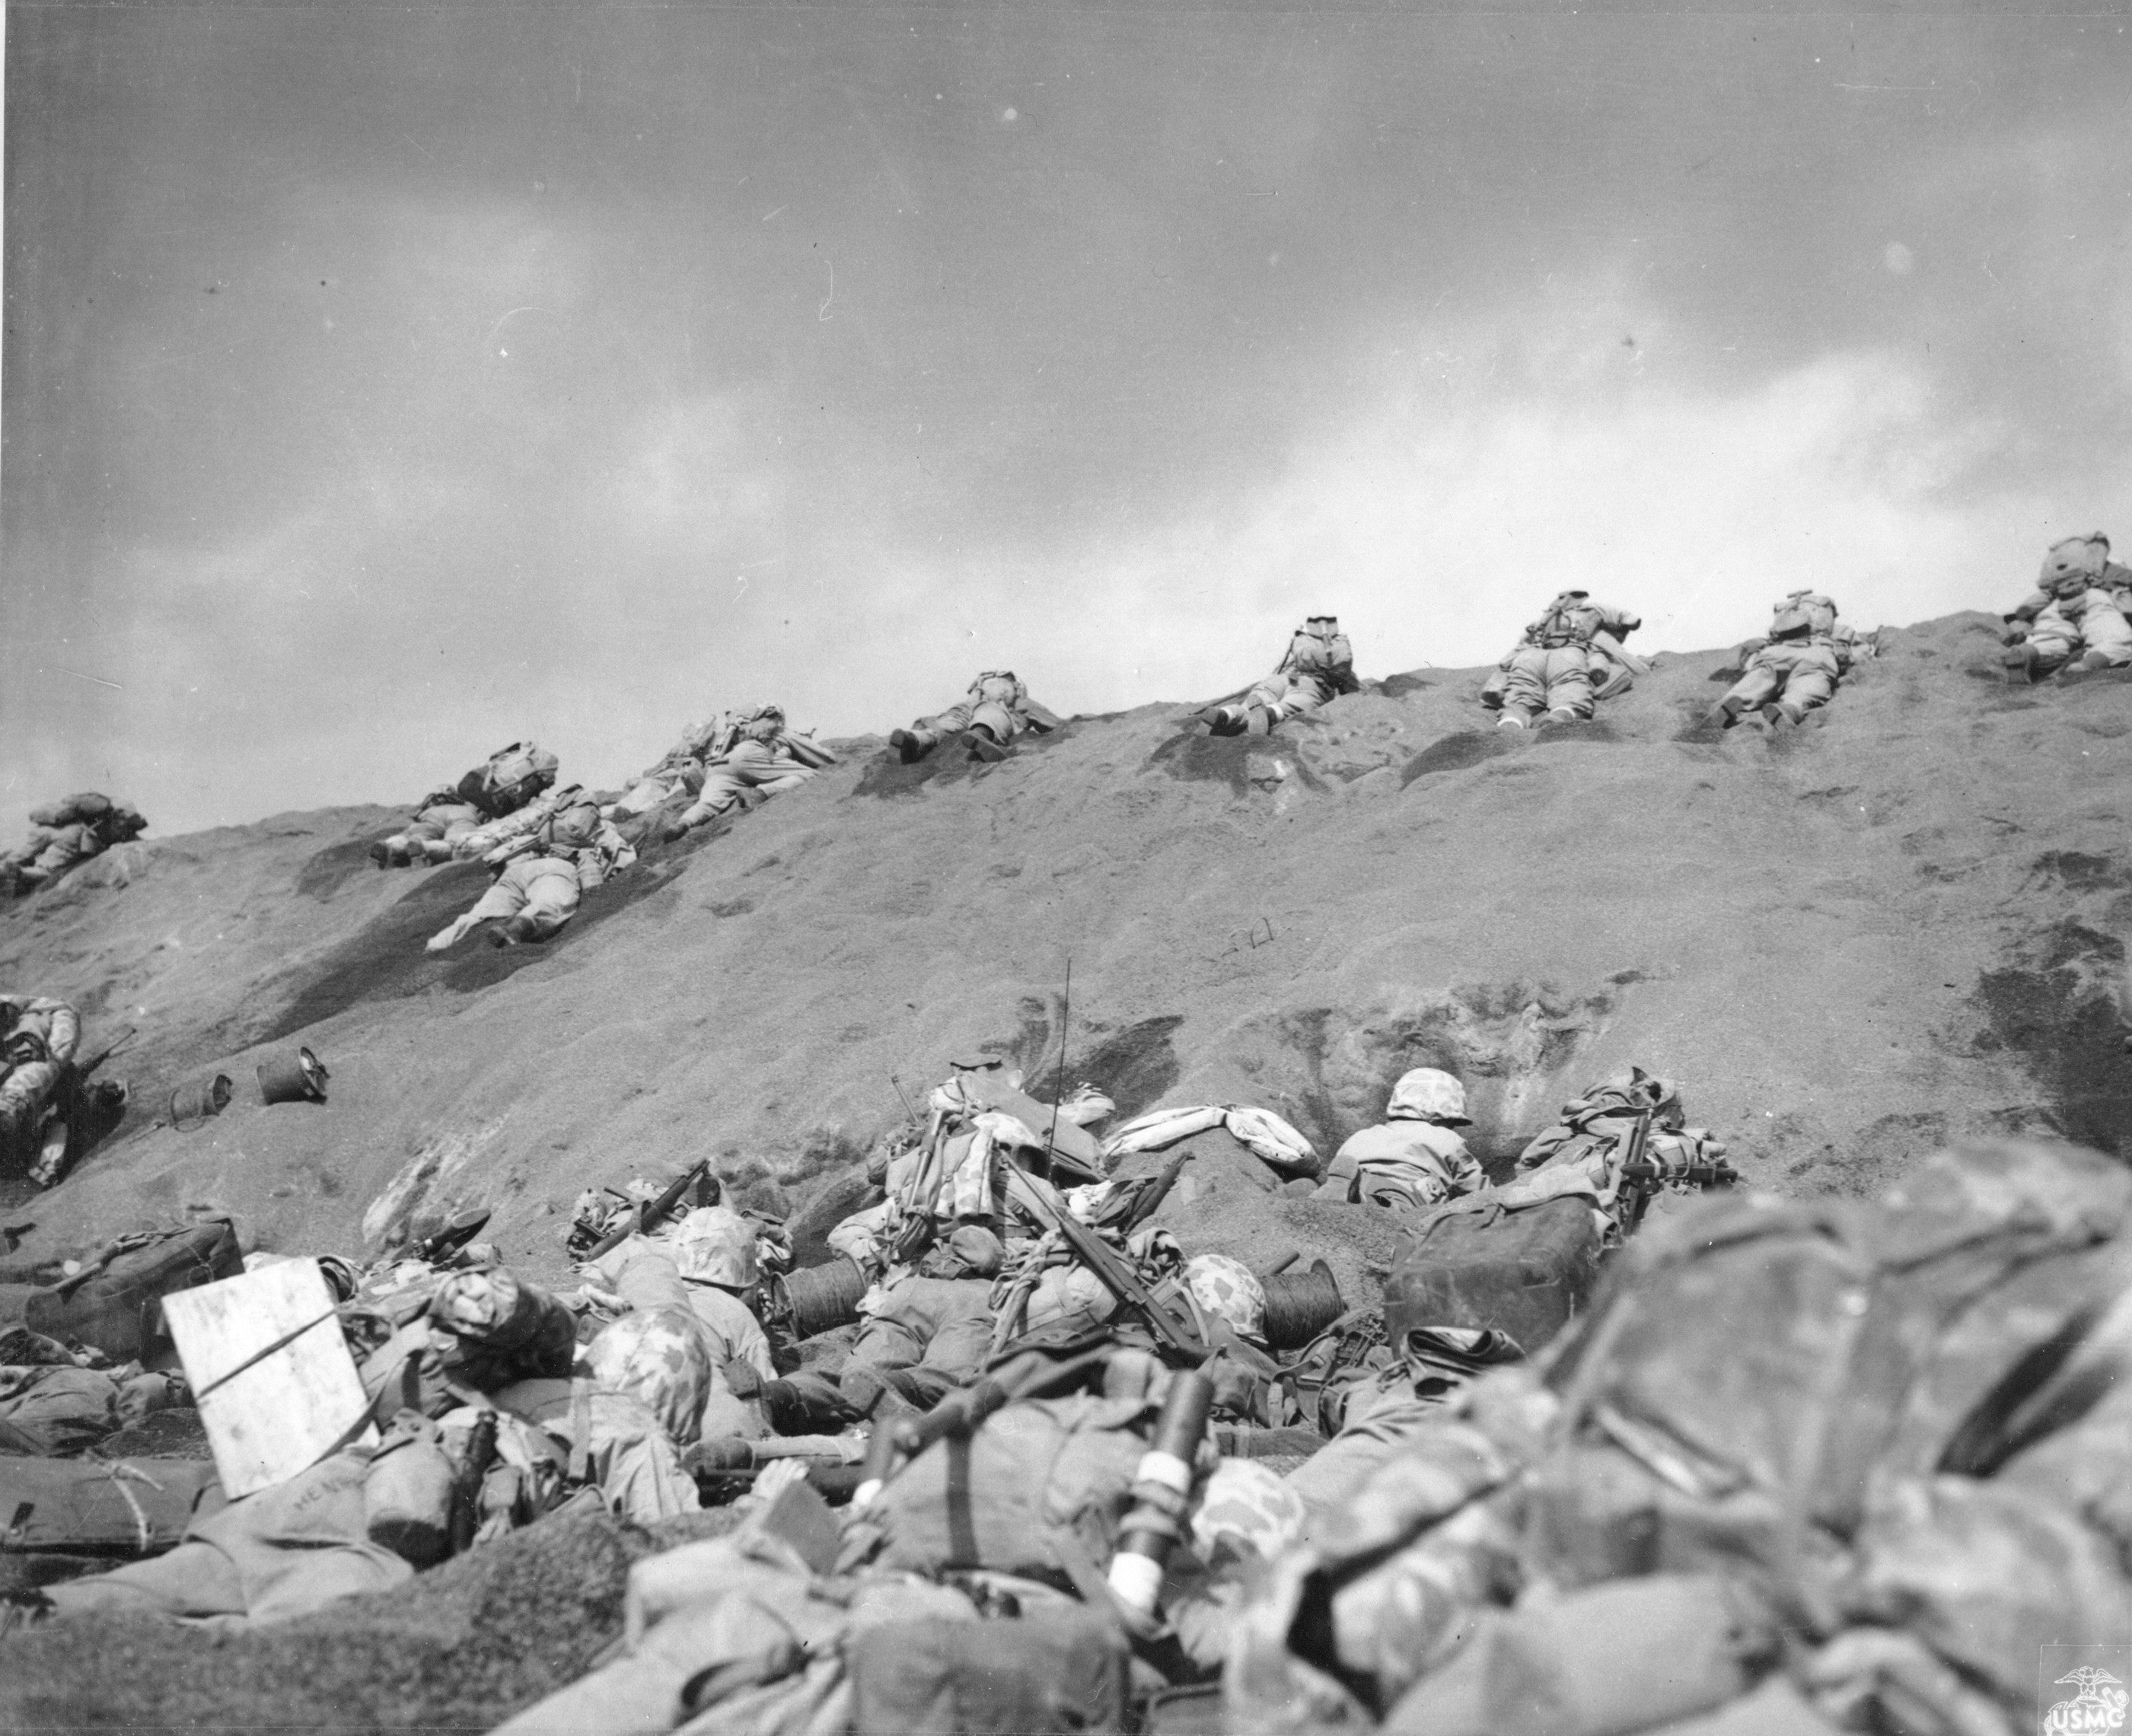 Men of USMC 5th Division advancing through the volcanic ash hills of Red Beach No. 1 at Iwo Jima, Japan, 19 Feb 1945, photo 1 of 2